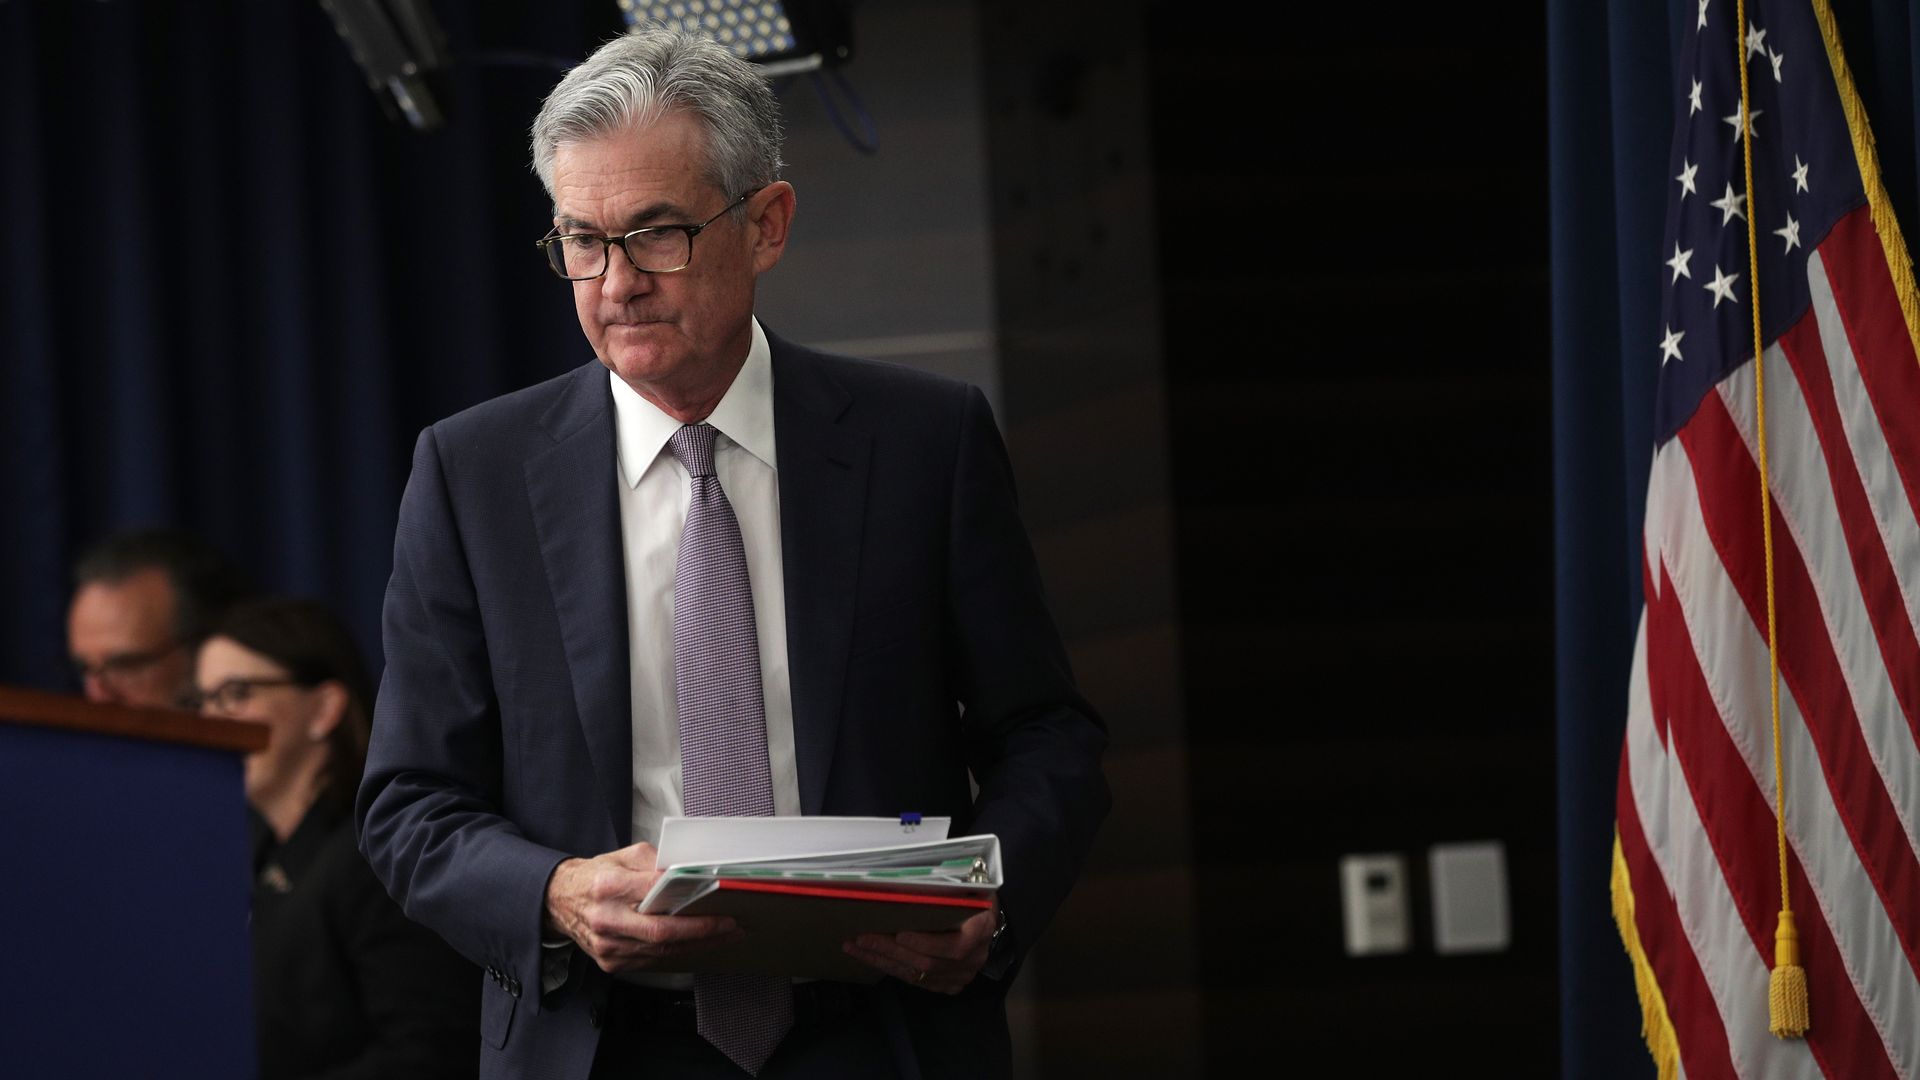 Federal Reserve chair Jerome Powell carries a binder to a podium, following the Fed's rate decision in September